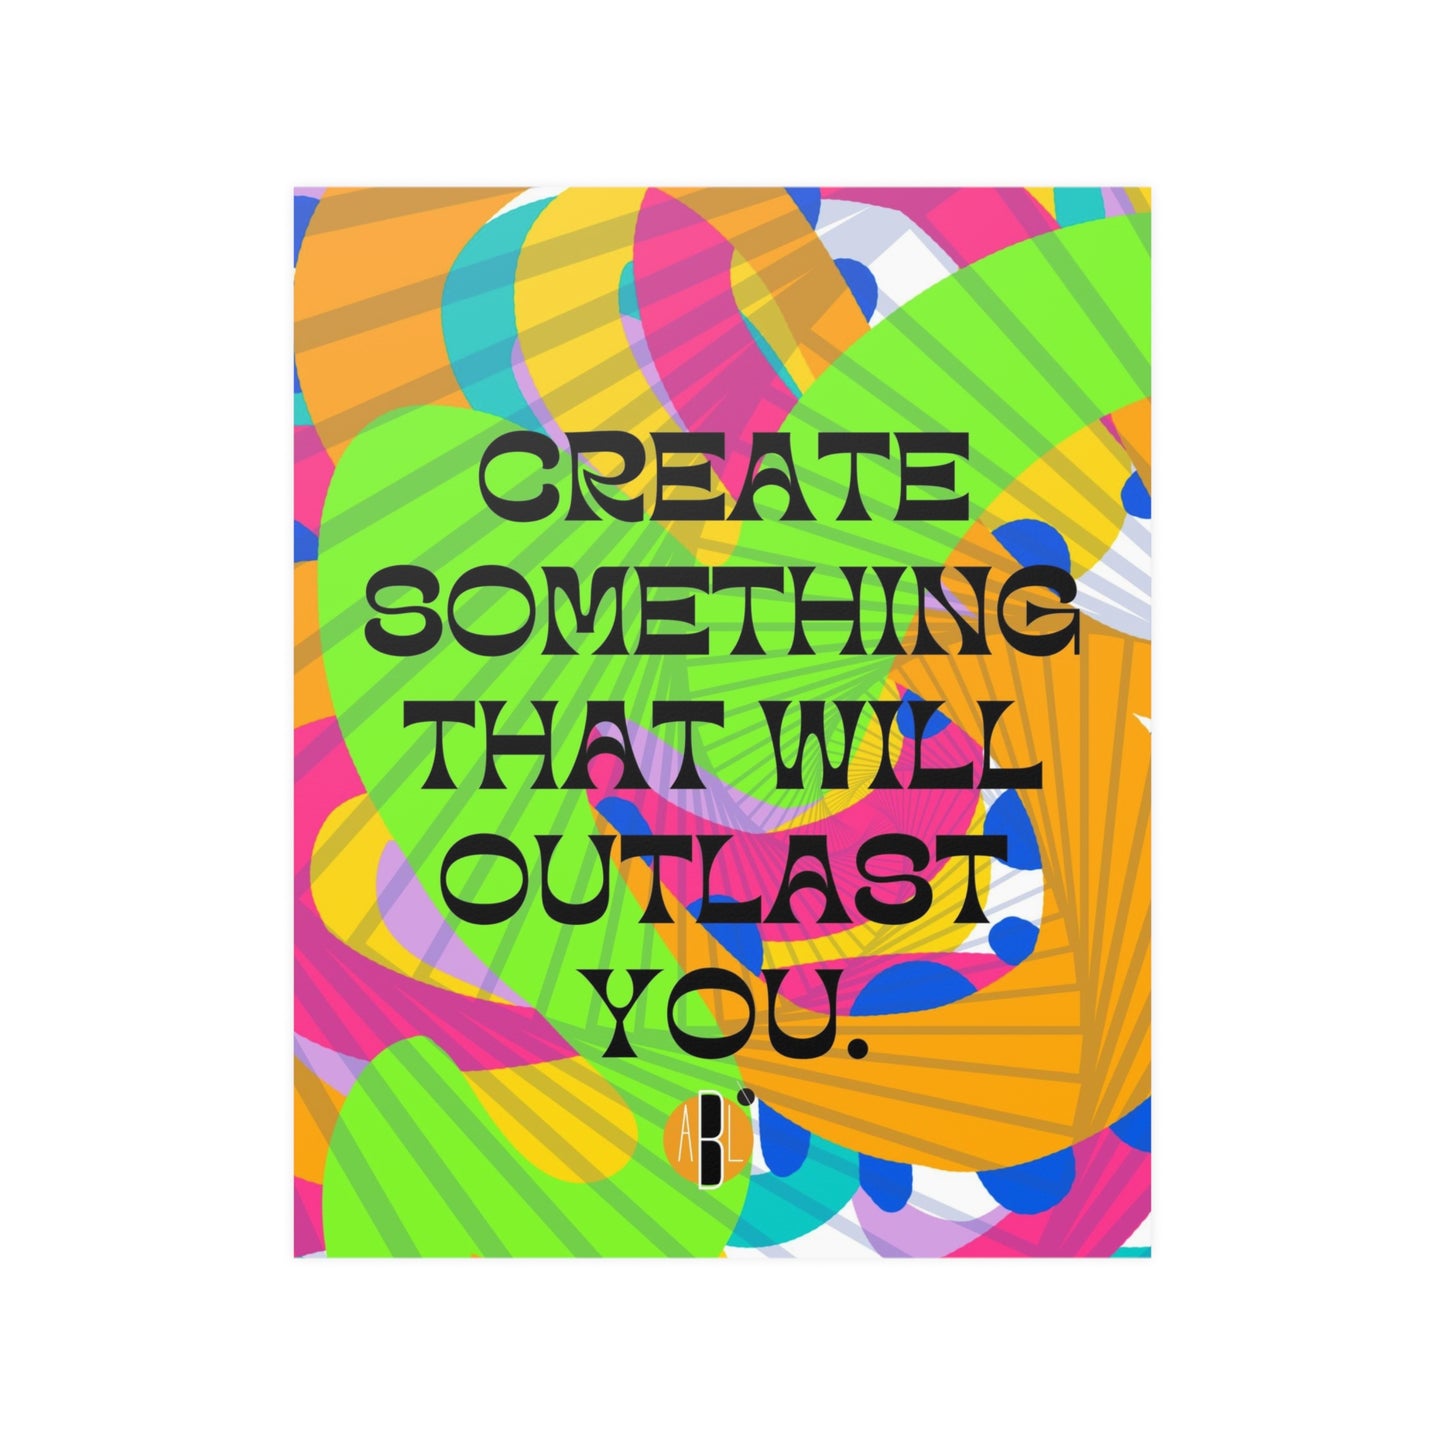 ABL Inspirational Poster: " Create Something..."